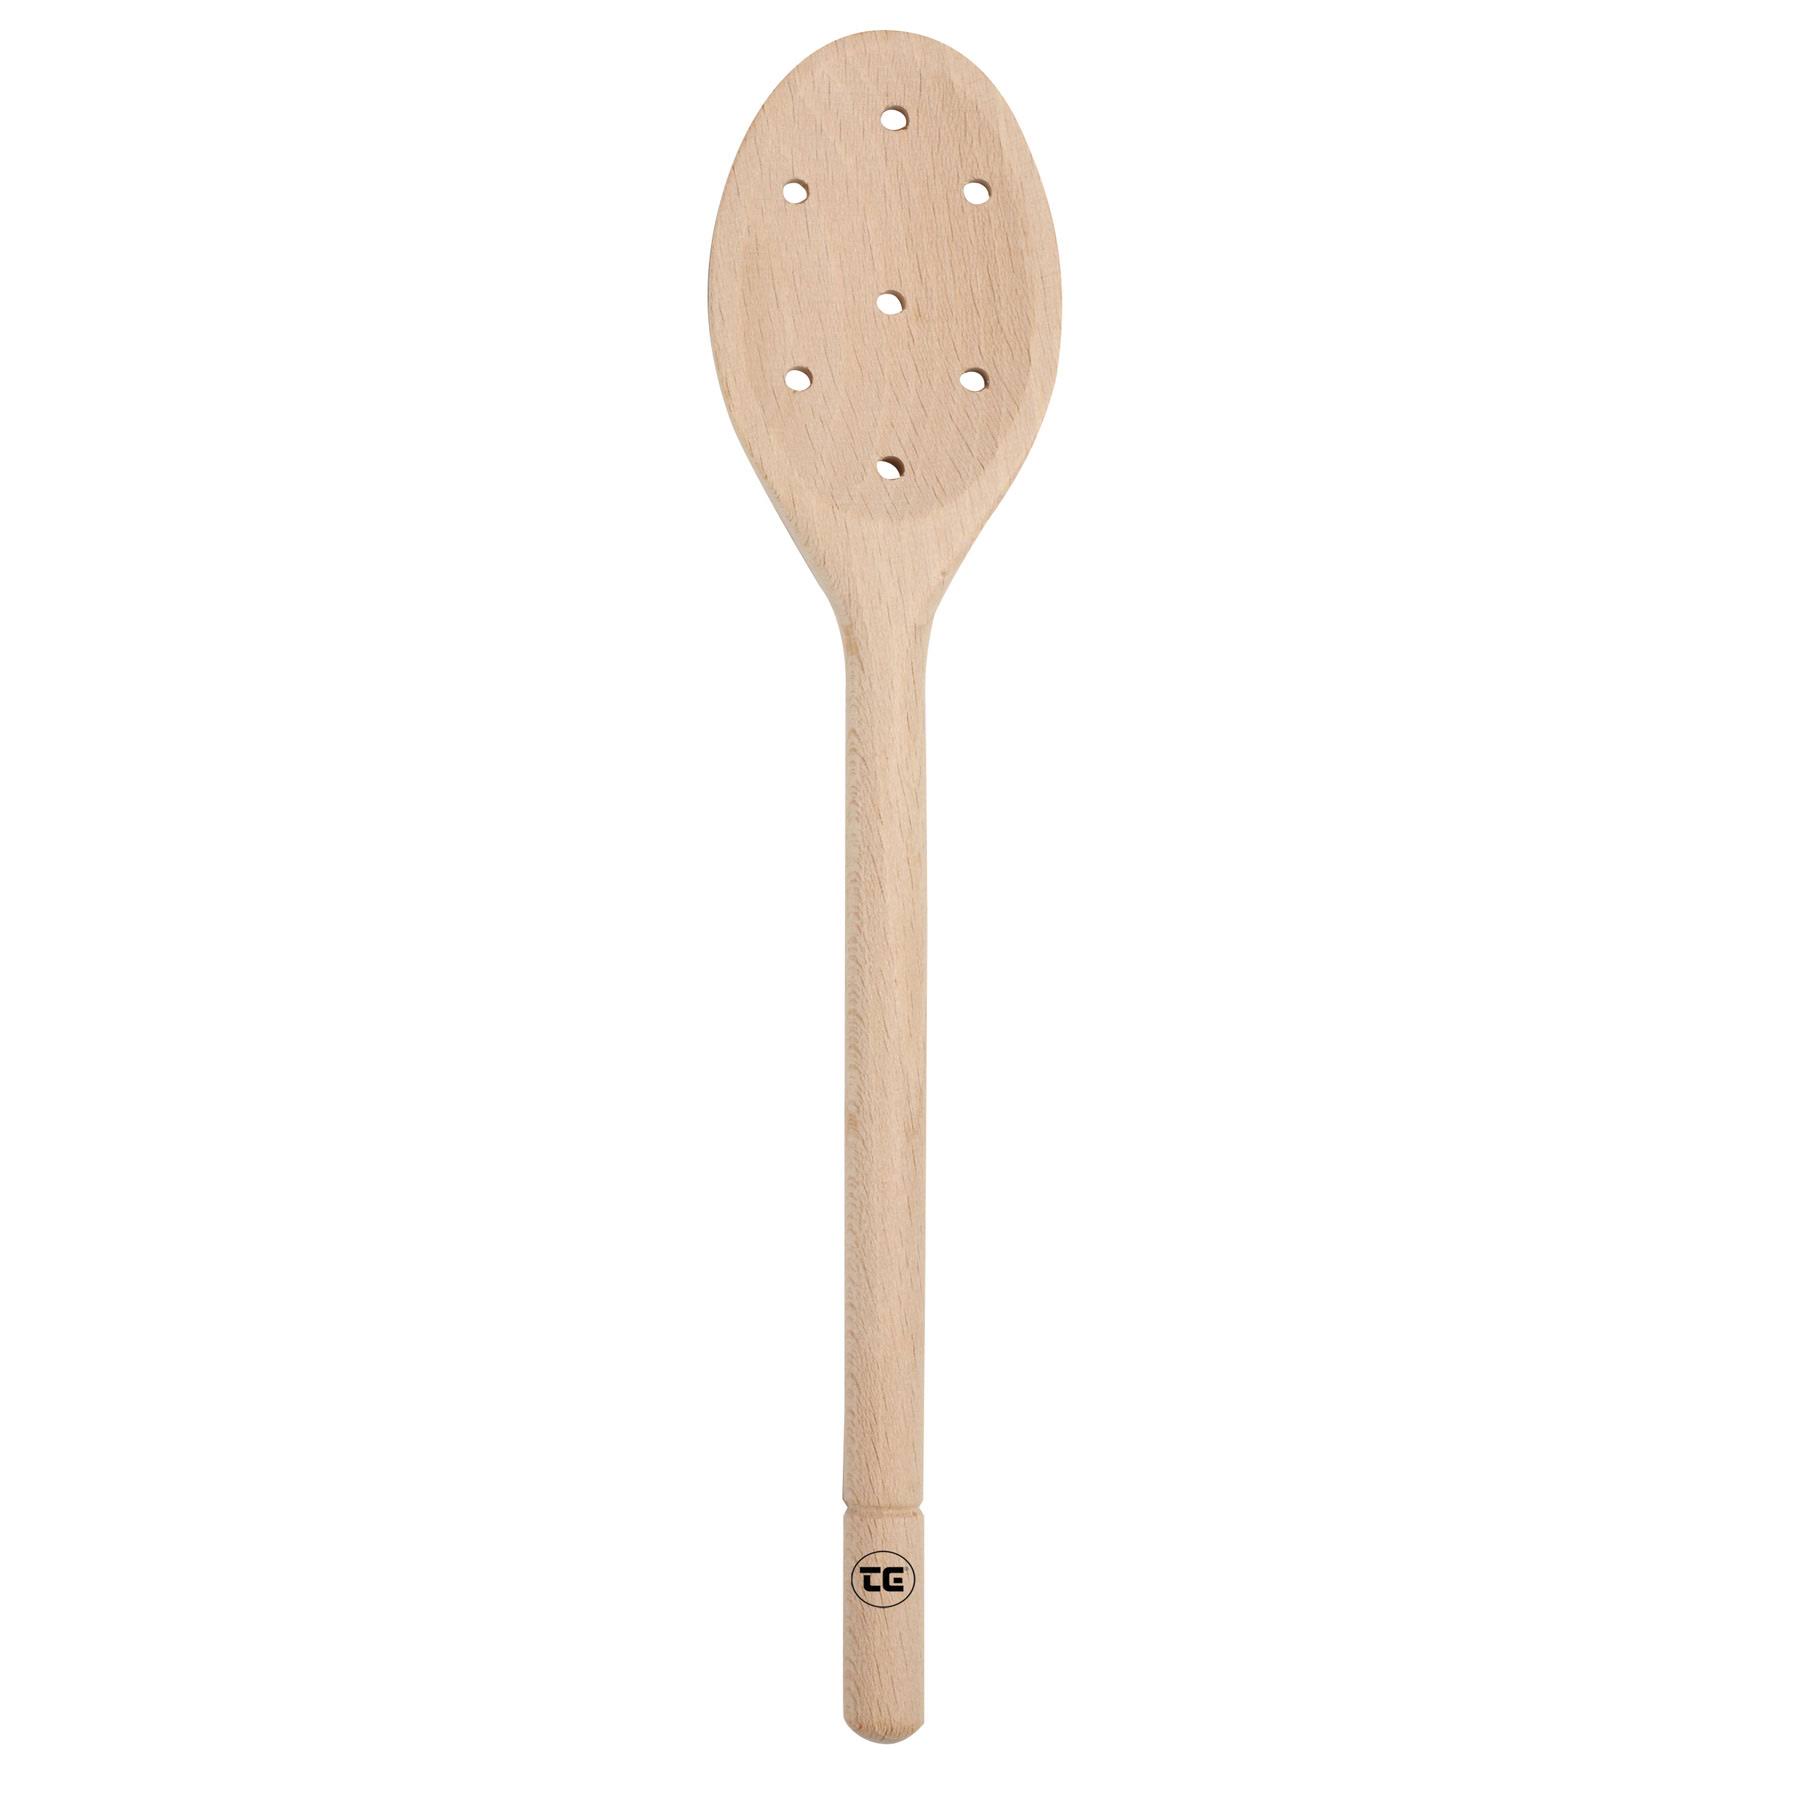 Wild Wood Wooden Spoon With Holes Beech 30cm